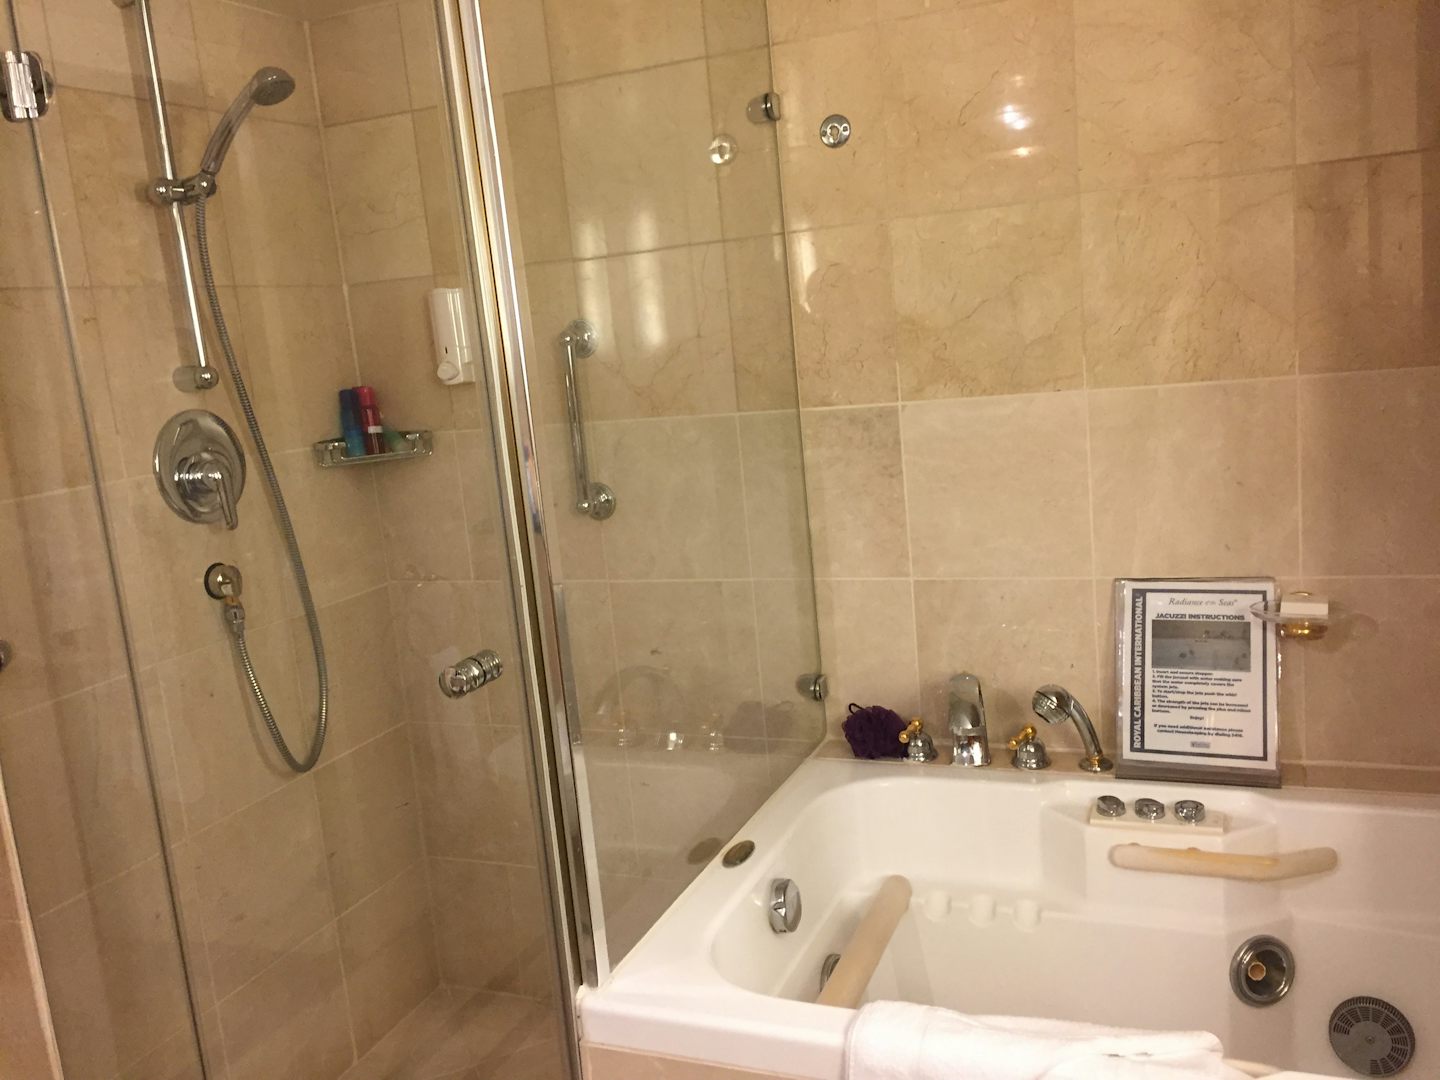 Cabin 1562 jacuzzi tub is not large.  It is the size of a regular tub, with